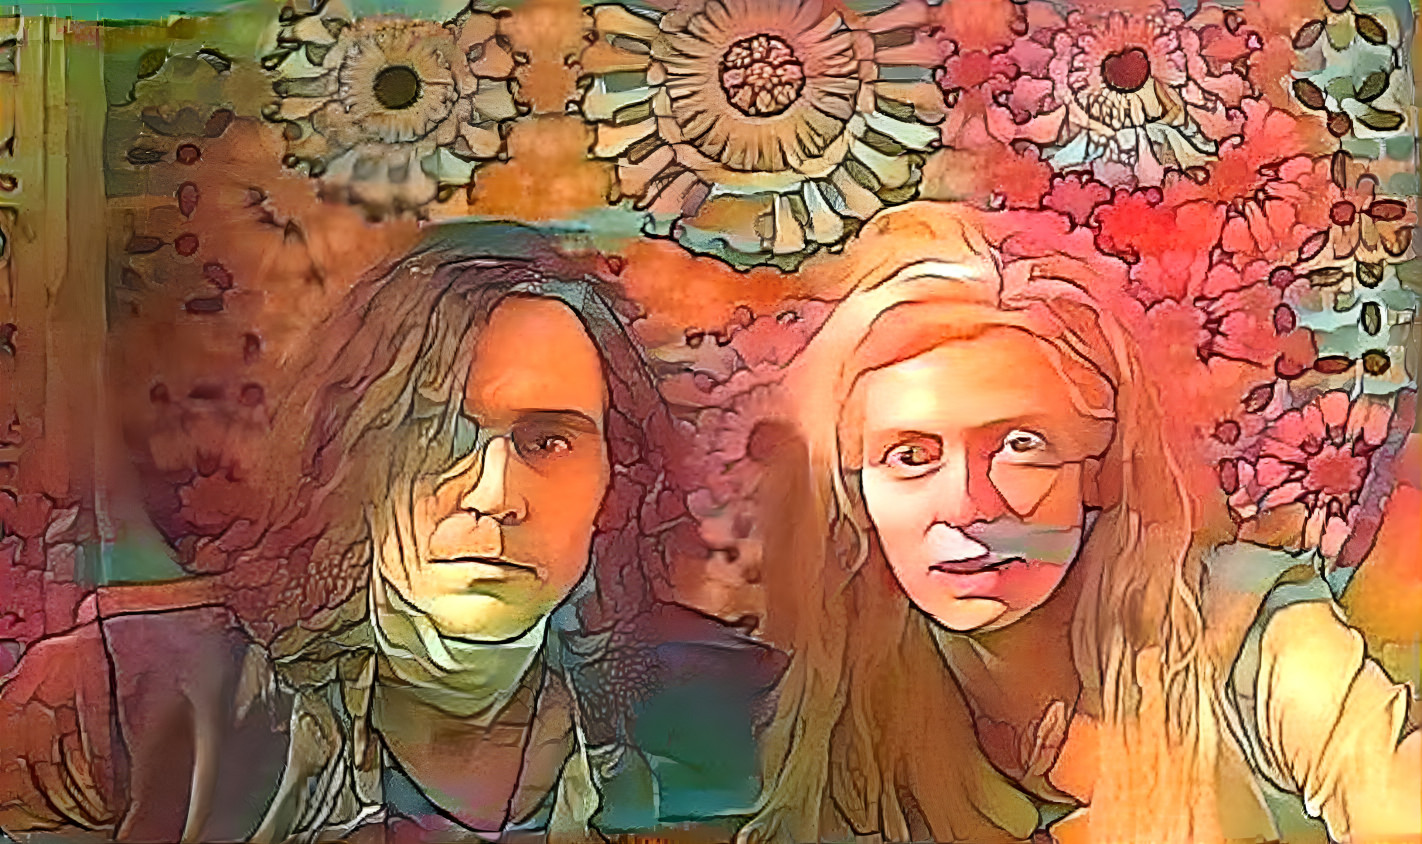 Only Lovers Left Alive 